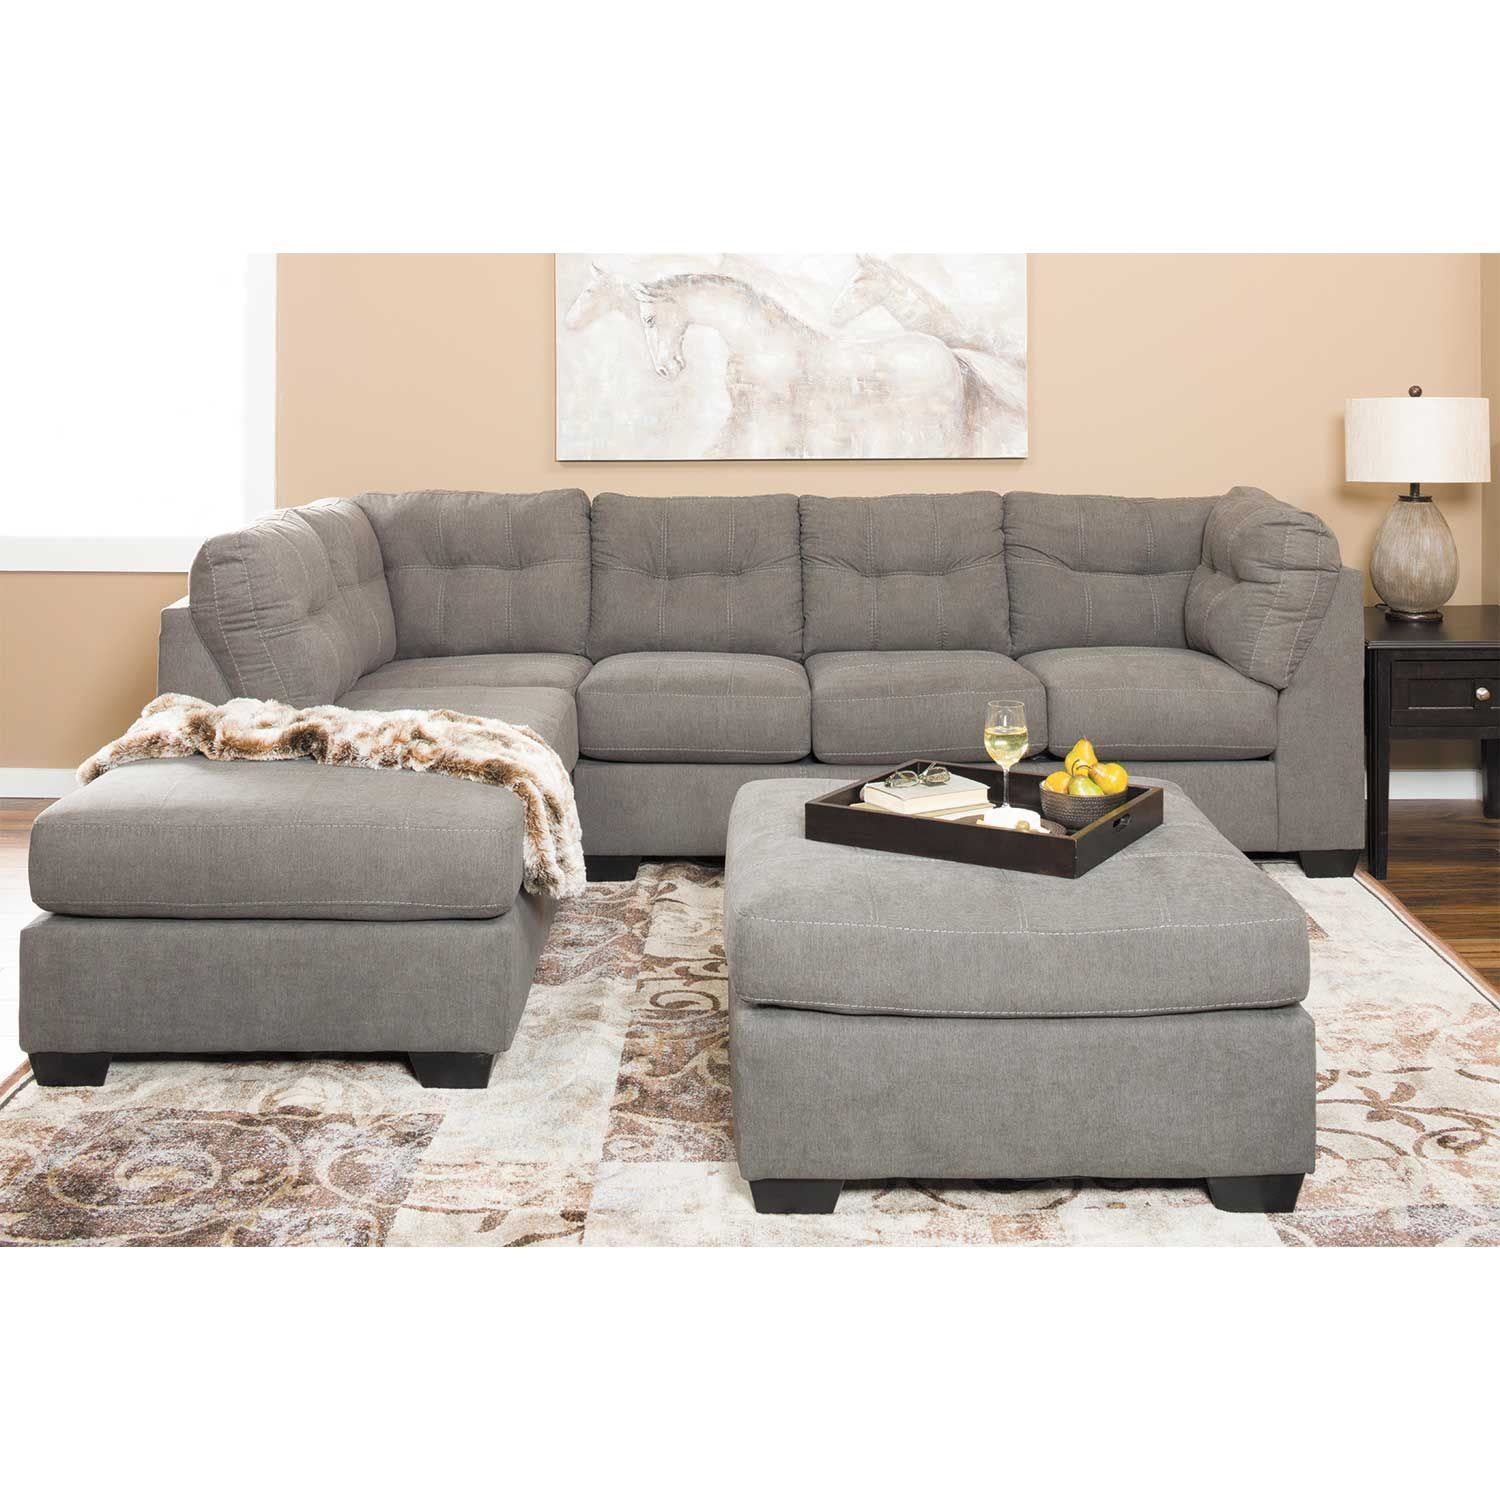 Maier Charcoal 2 Piece Sectional With Raf Chaise 4520017 Pertaining To 2Pc Burland Contemporary Sectional Sofas Charcoal (View 3 of 15)